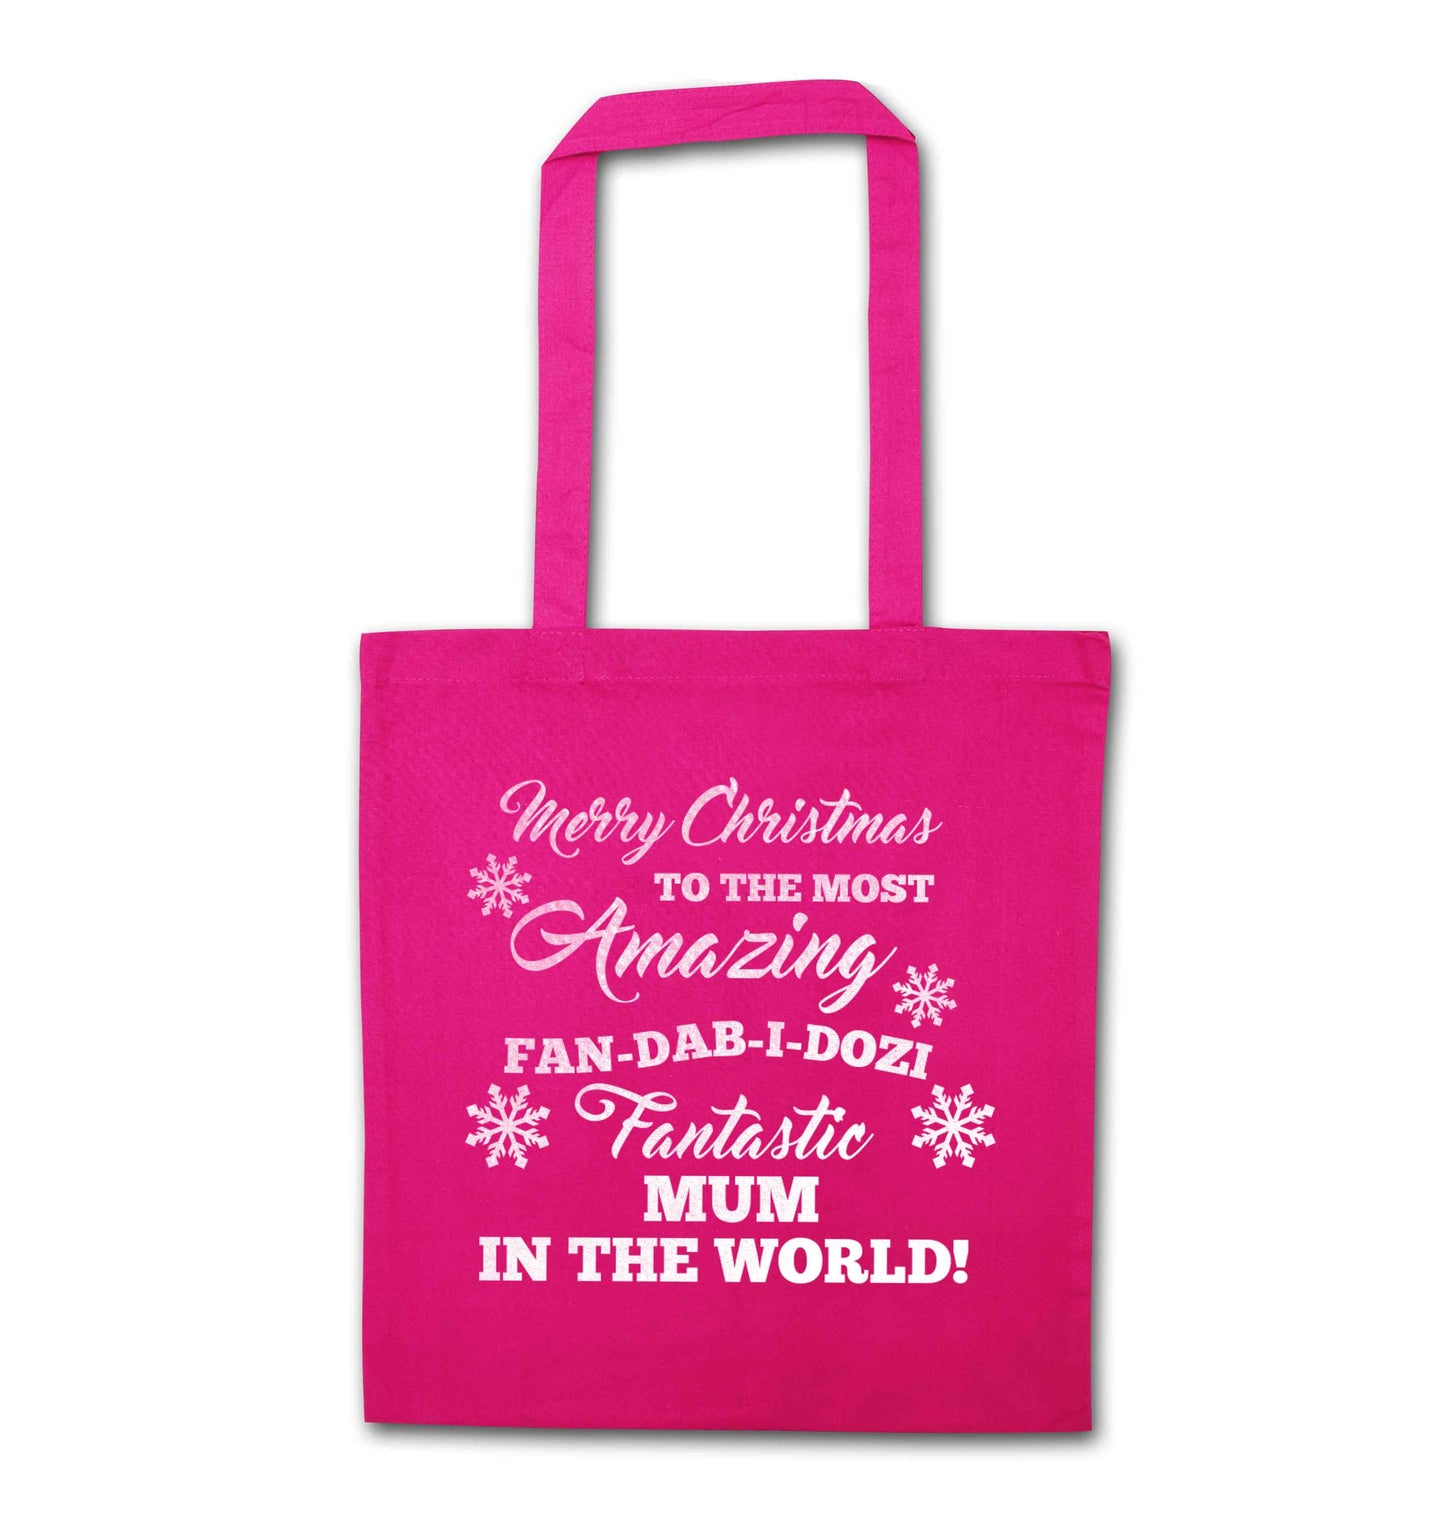 Merry Christmas to the most amazing fan-dab-i-dozi fantasic mum in the world pink tote bag